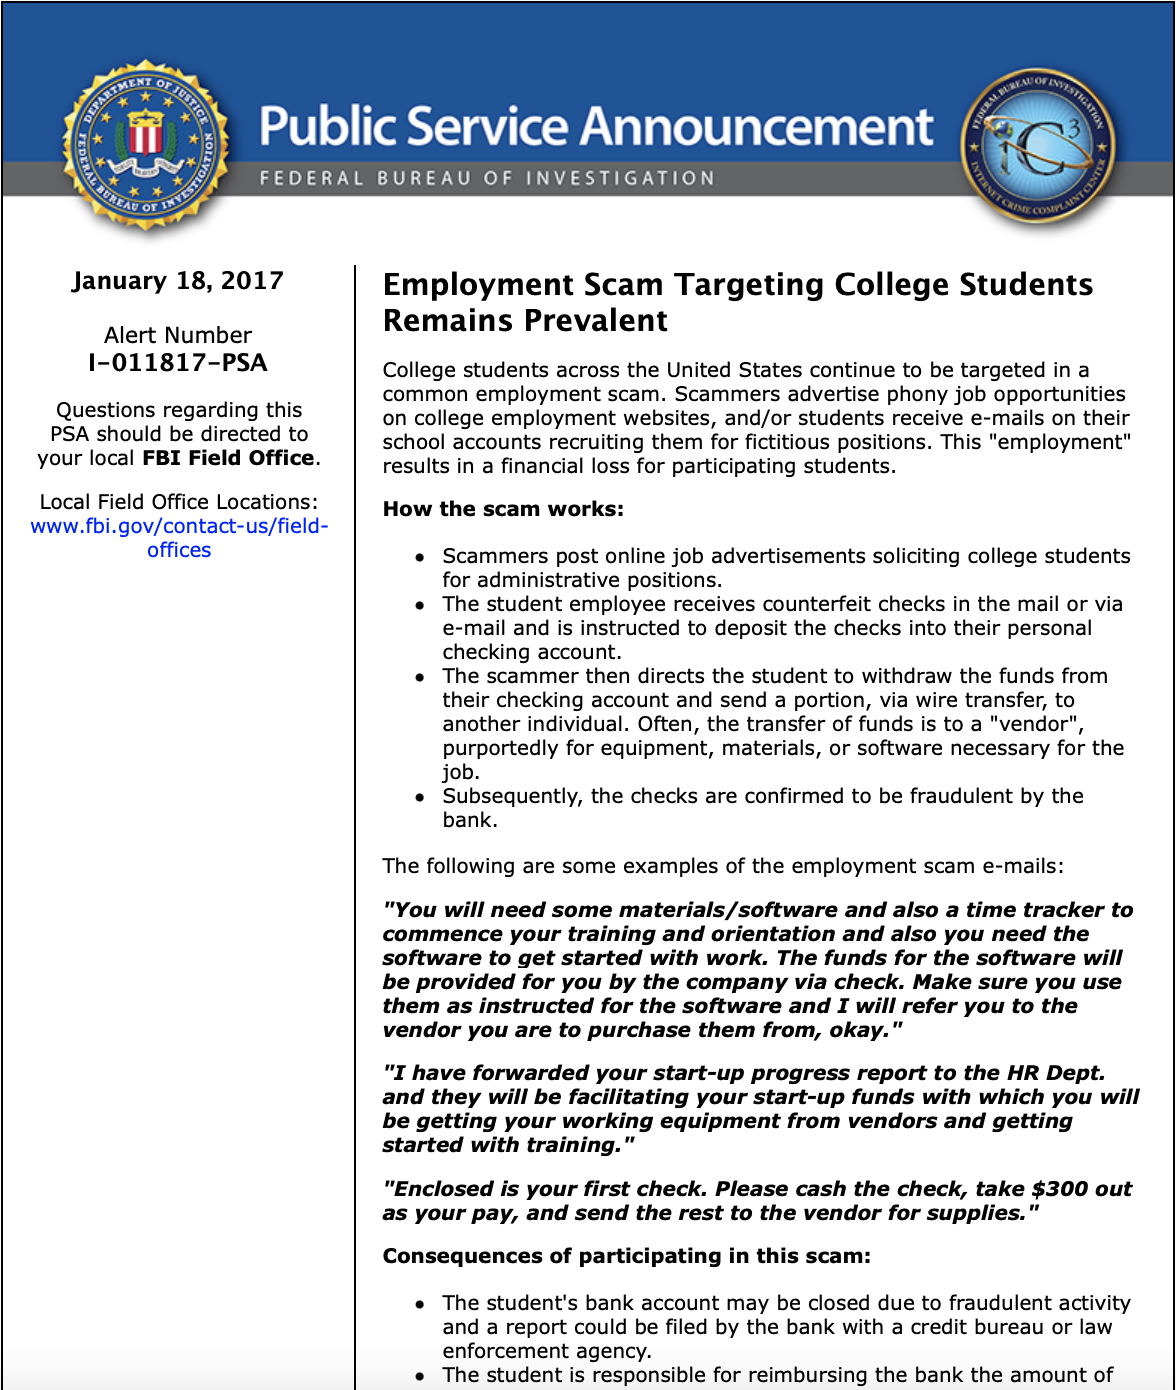 FBI PSA: Employment Scam Targeting College Students Remains Prevalent